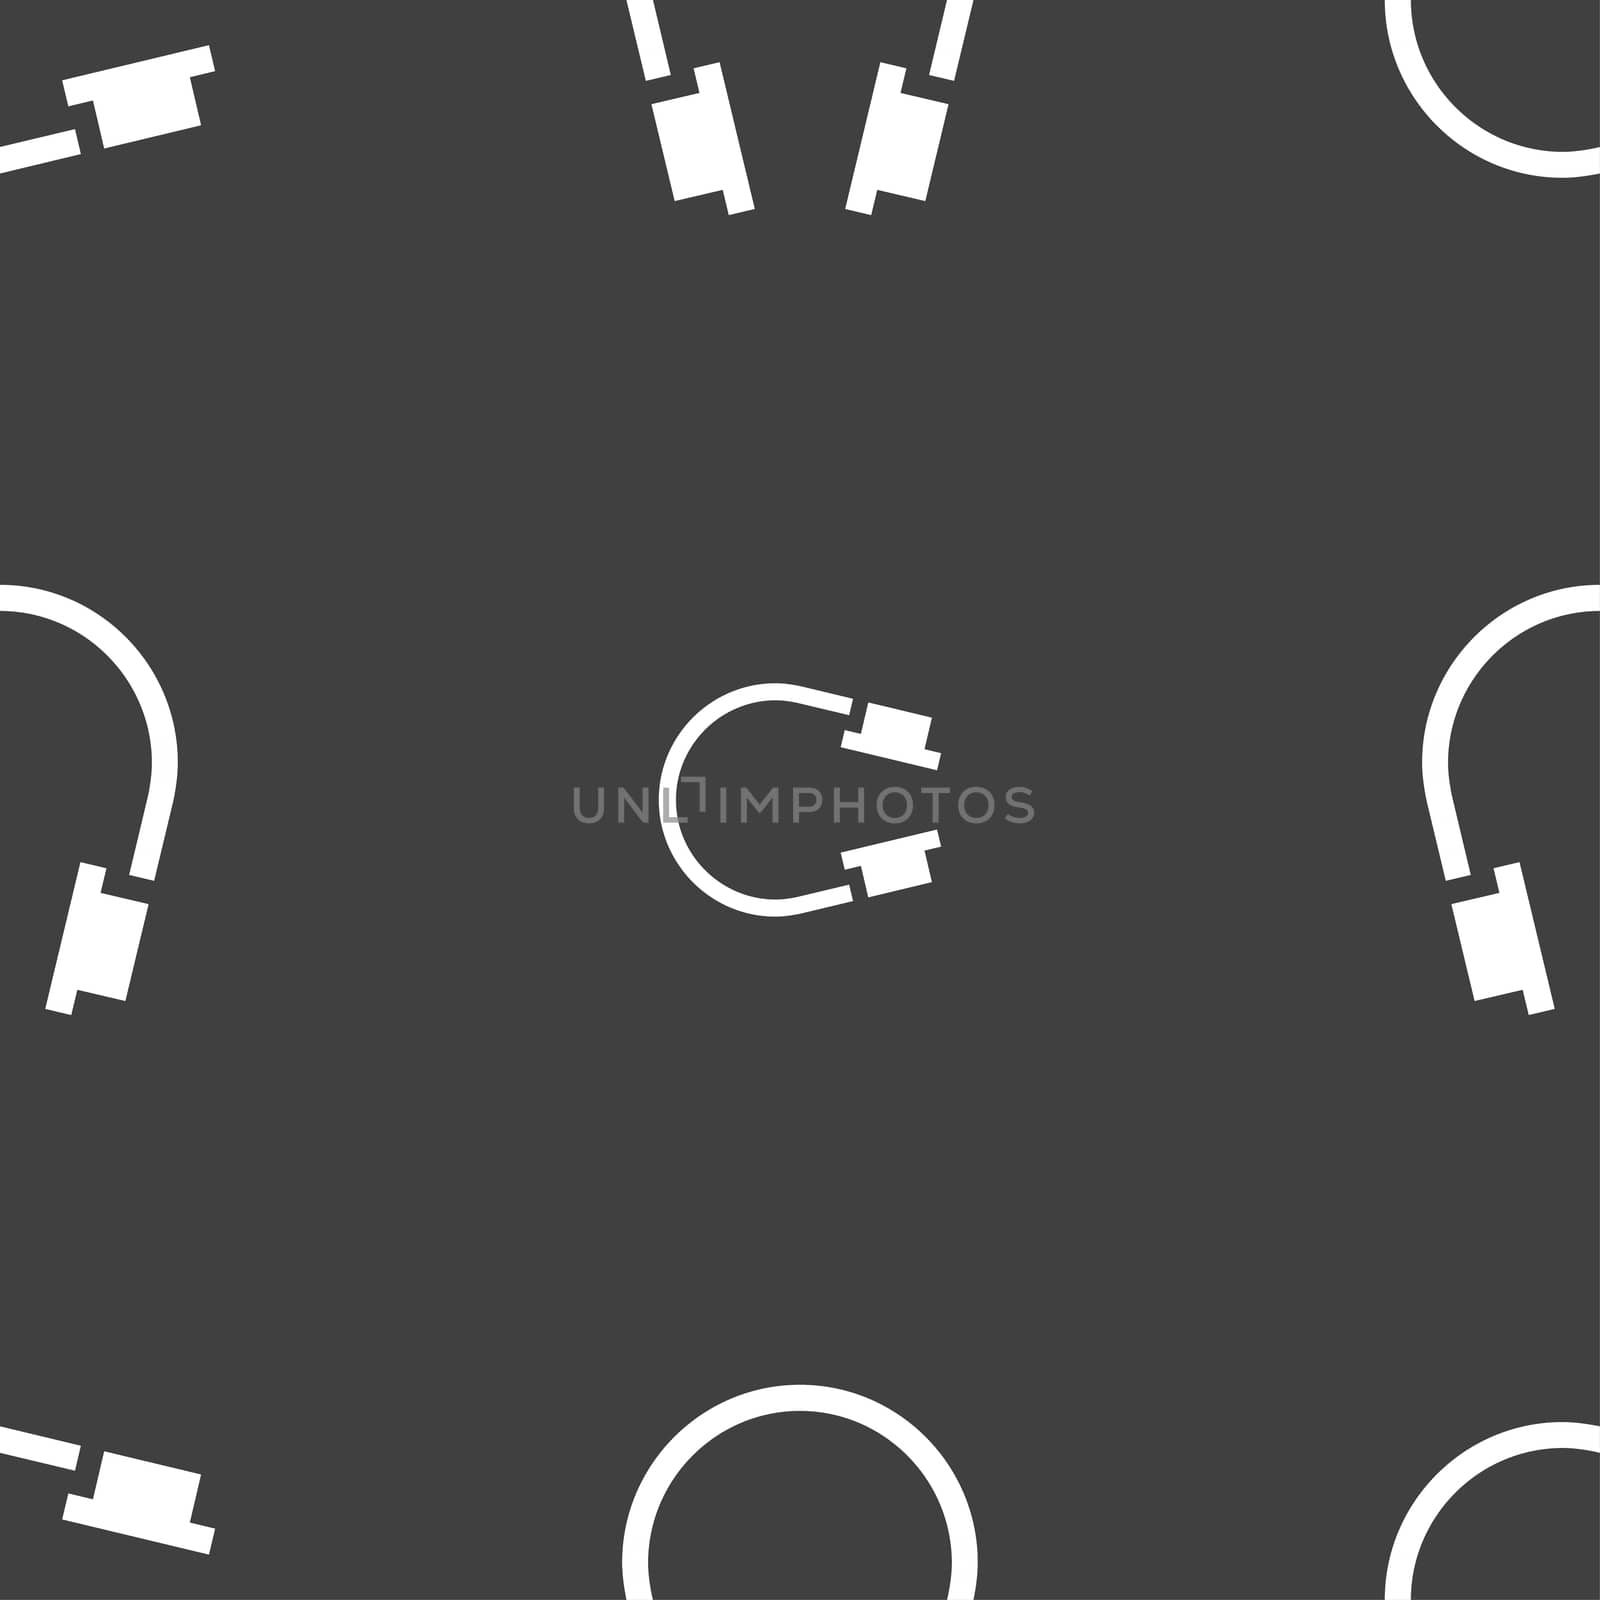 headsets icon sign. Seamless pattern on a gray background. illustration